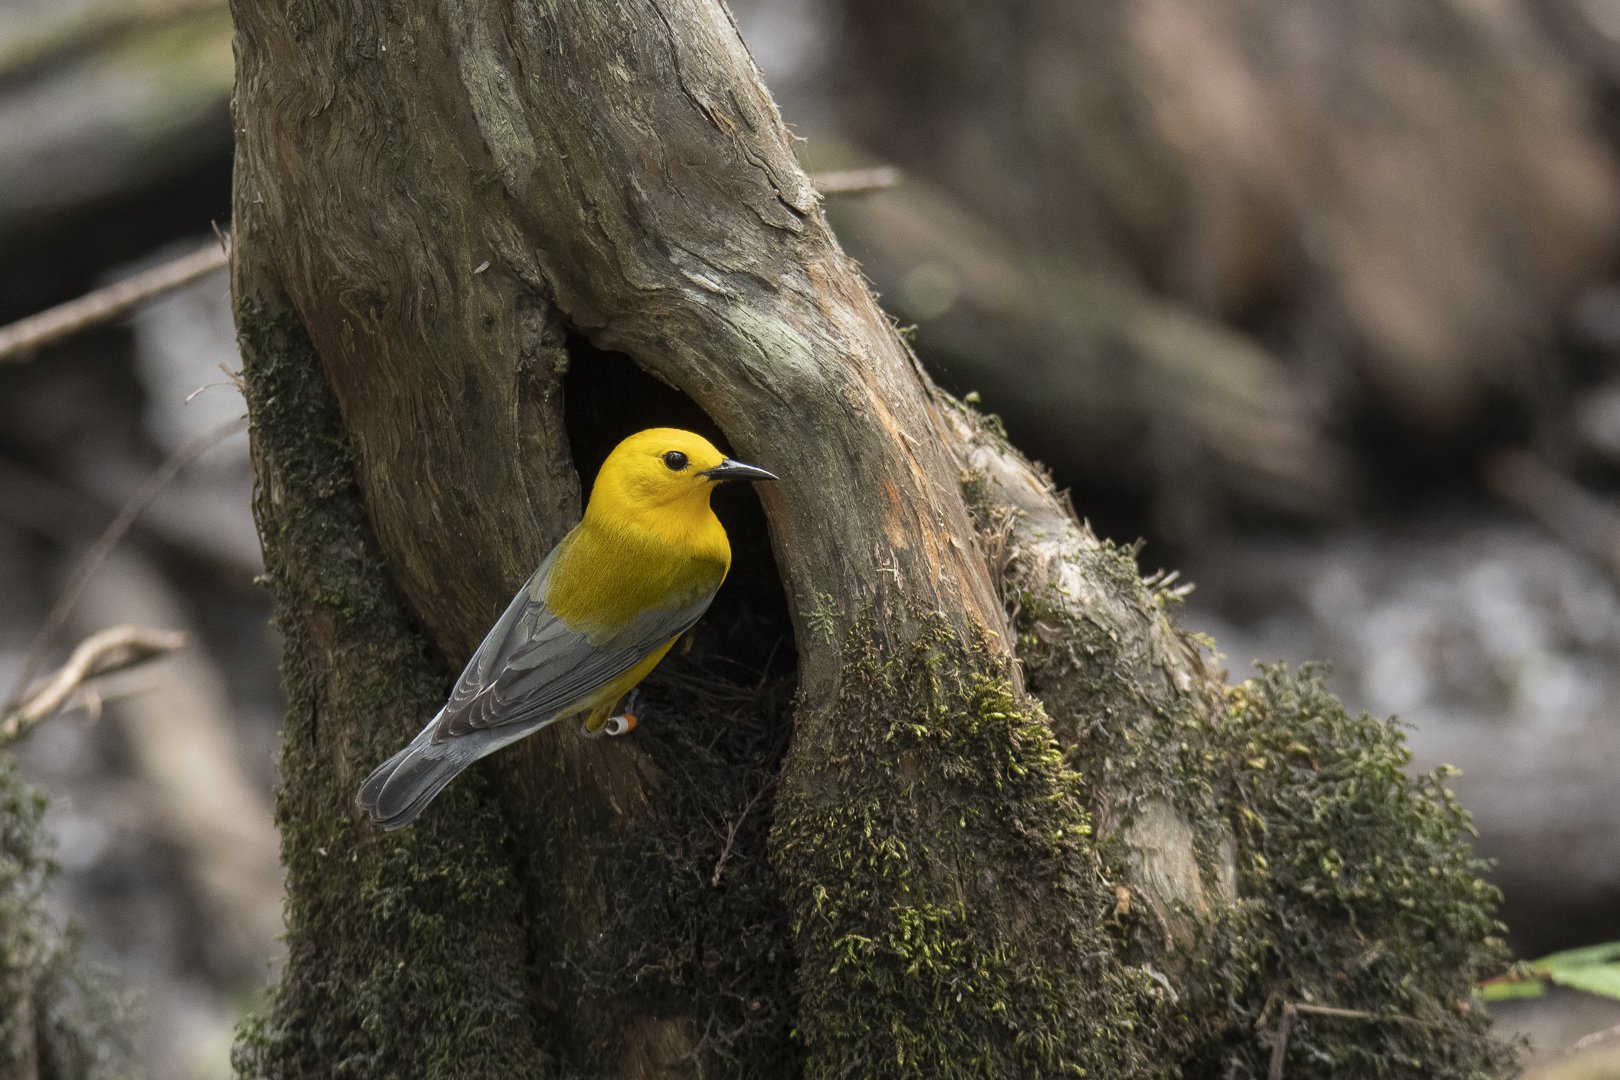 prothonotary warbler zs.jpg